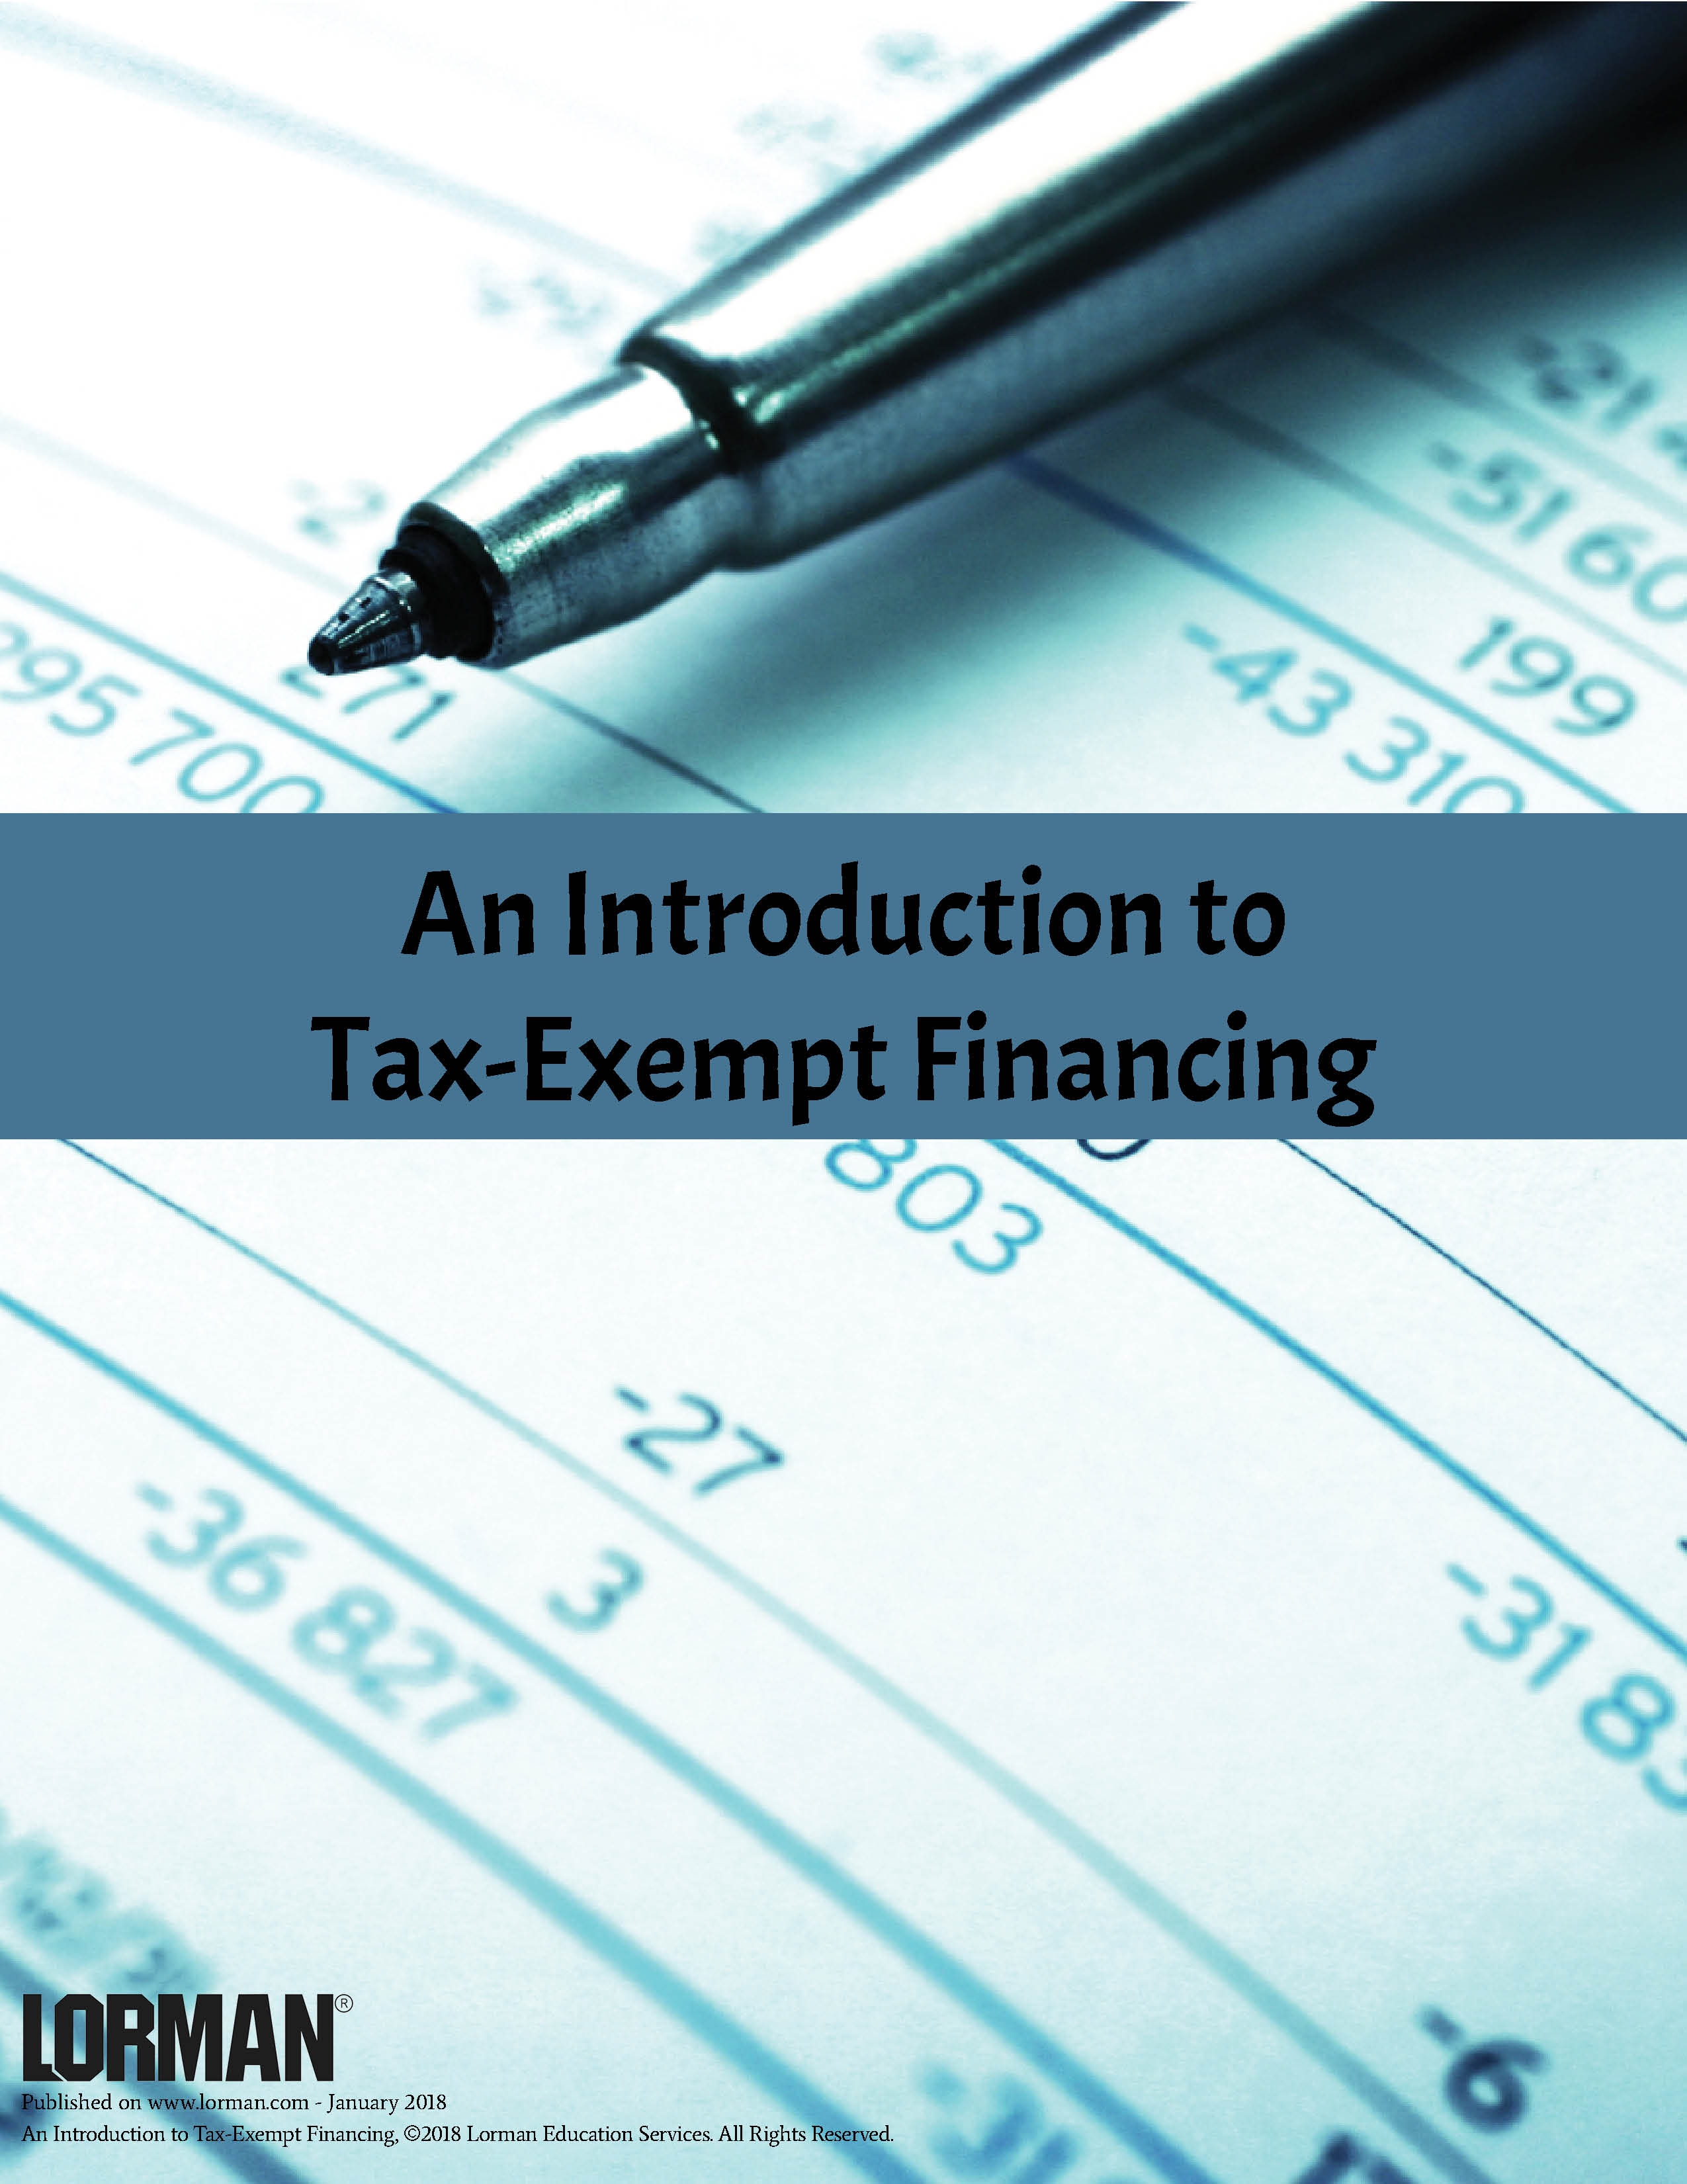 An Introduction to Tax-Exempt Financing